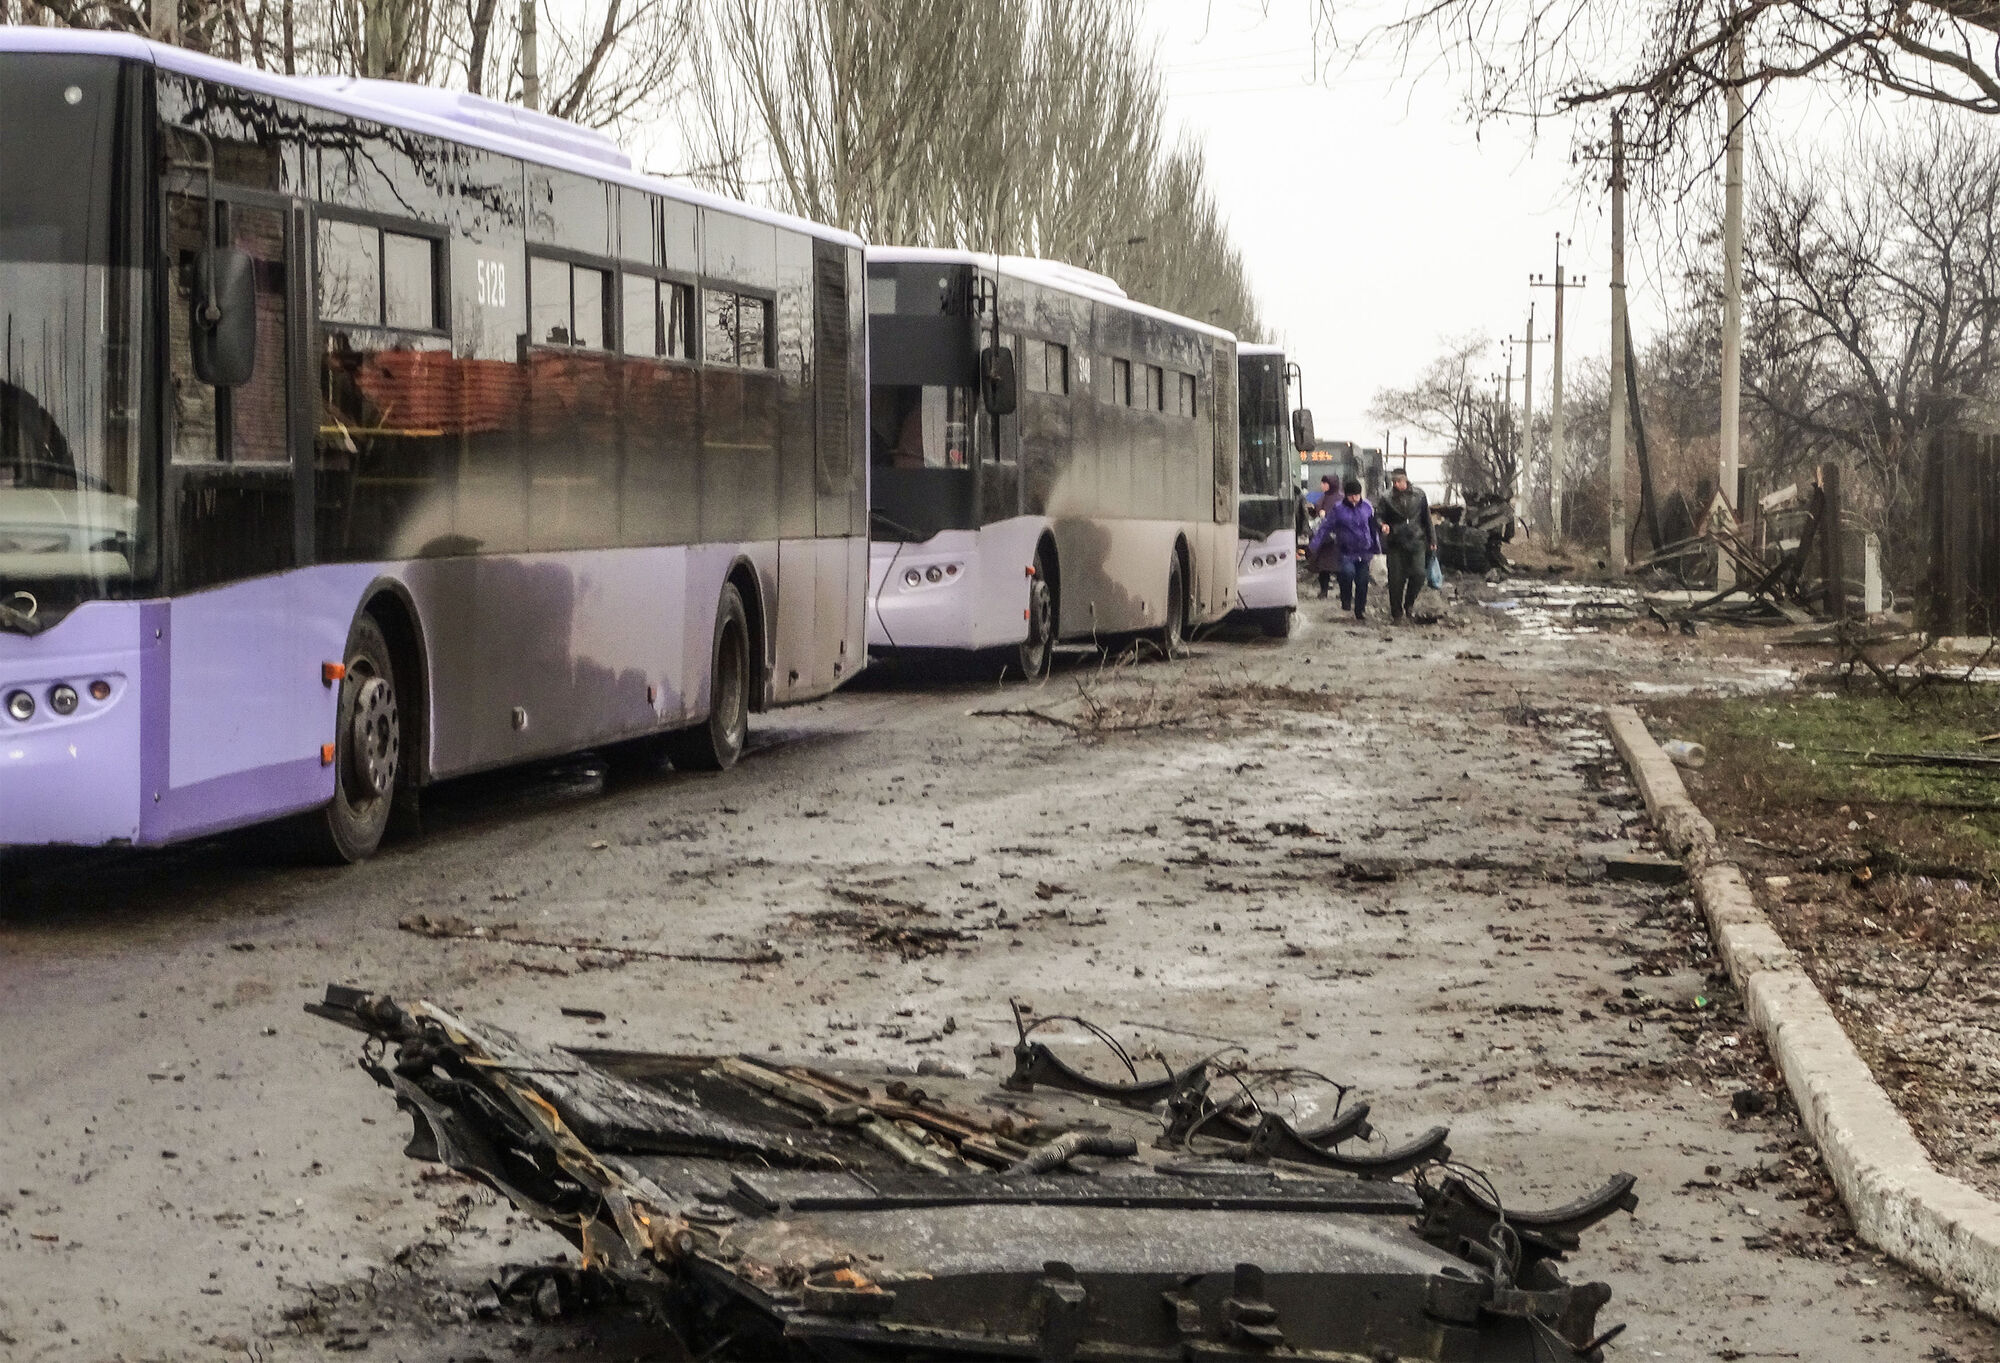 Buses in disaster zone